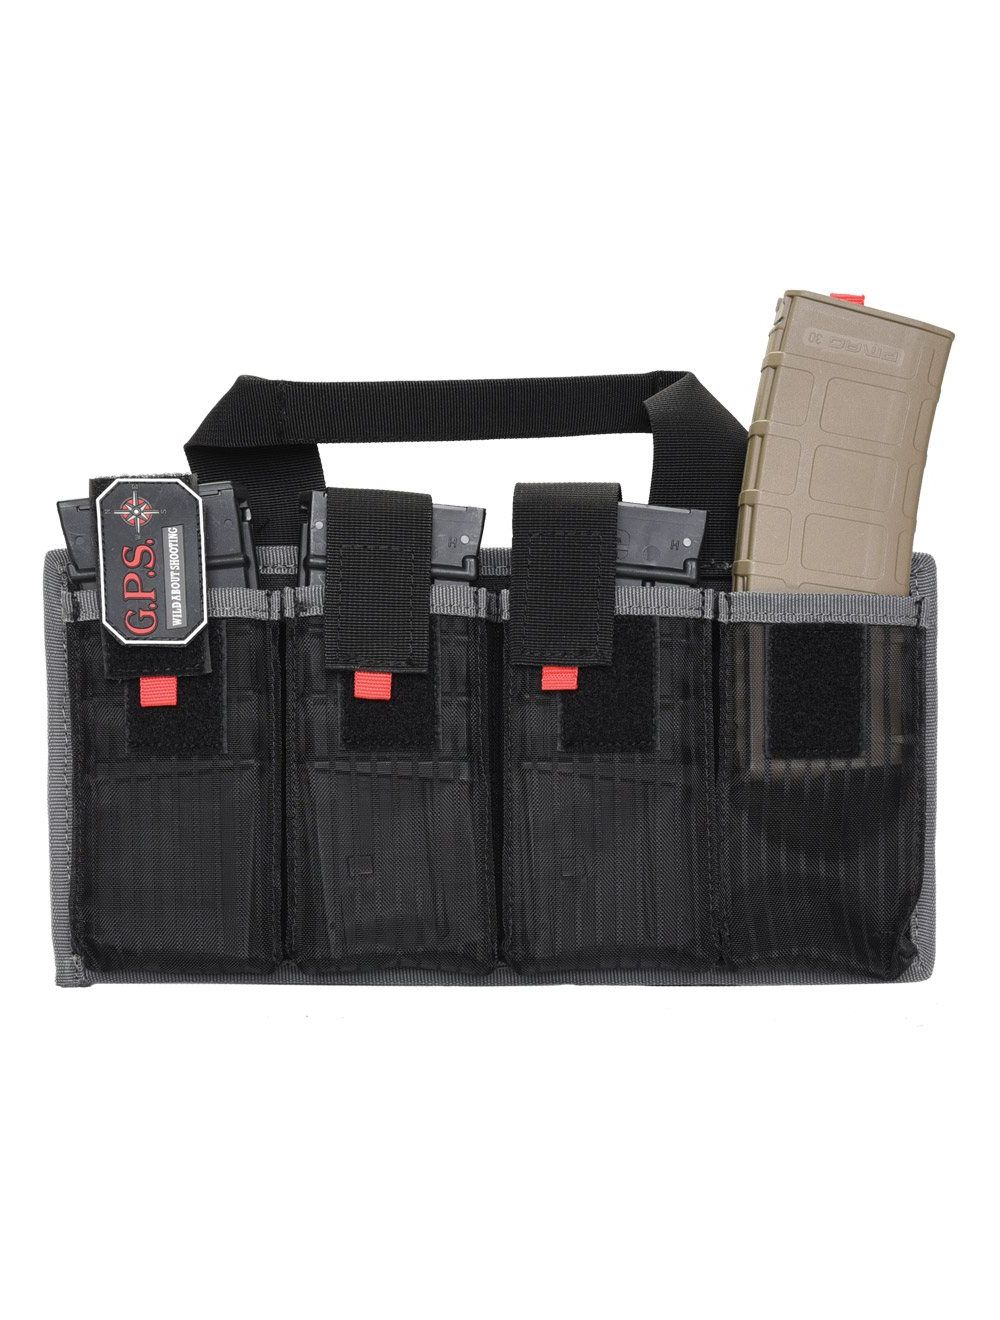 A/R Mag Tote - 8 Mags